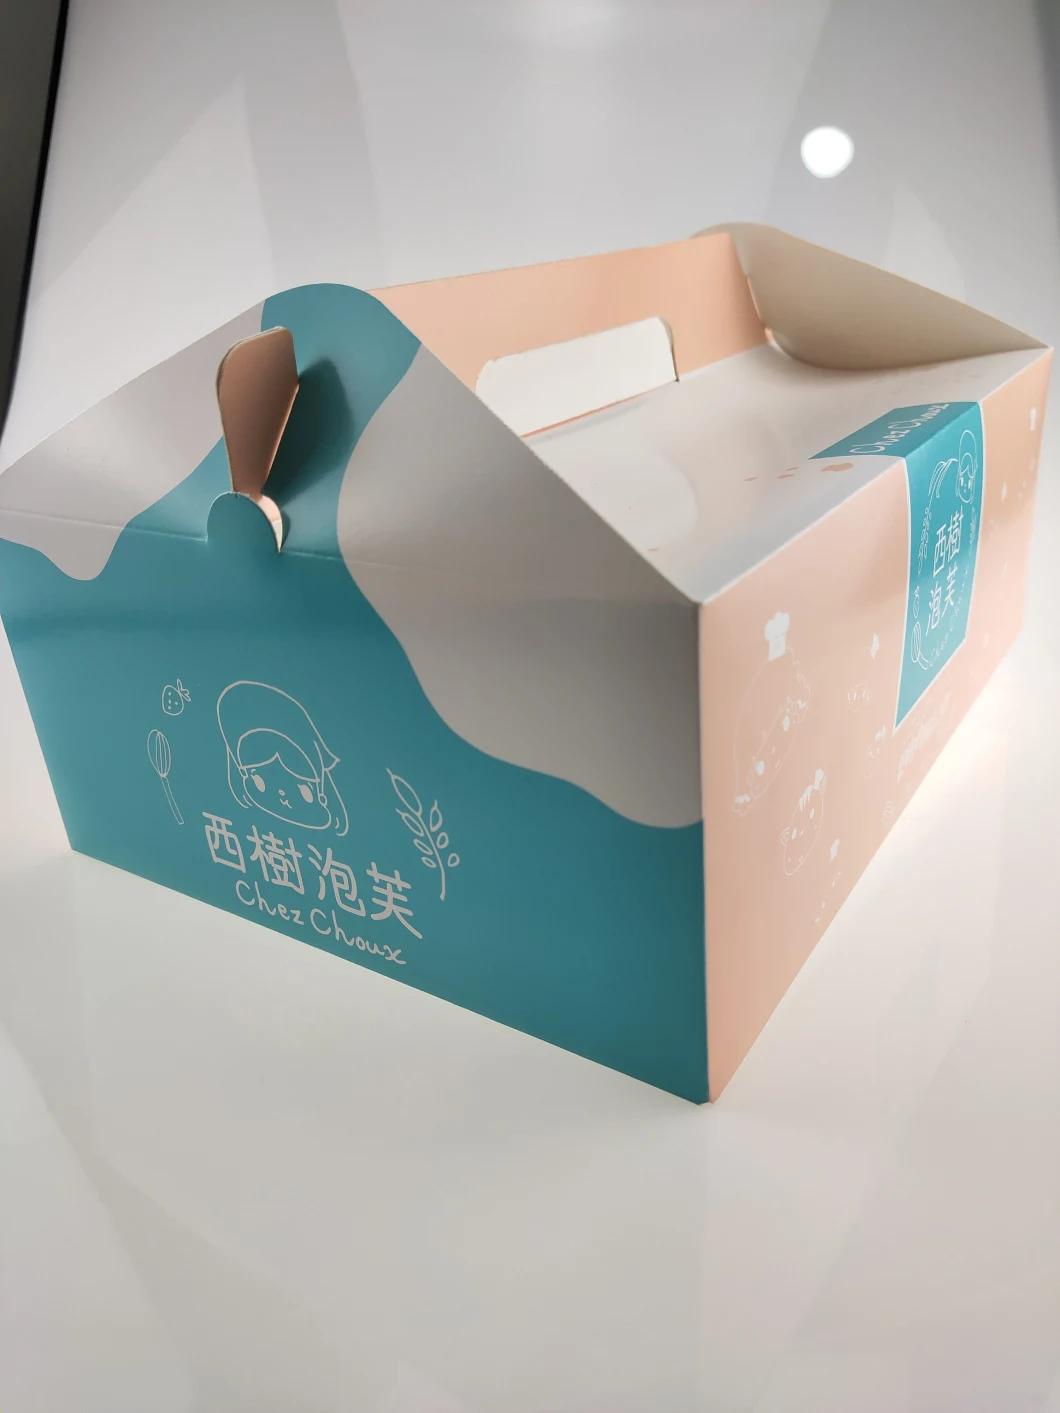 Customize Various High-Quality Packaging Fold Containers Boxes